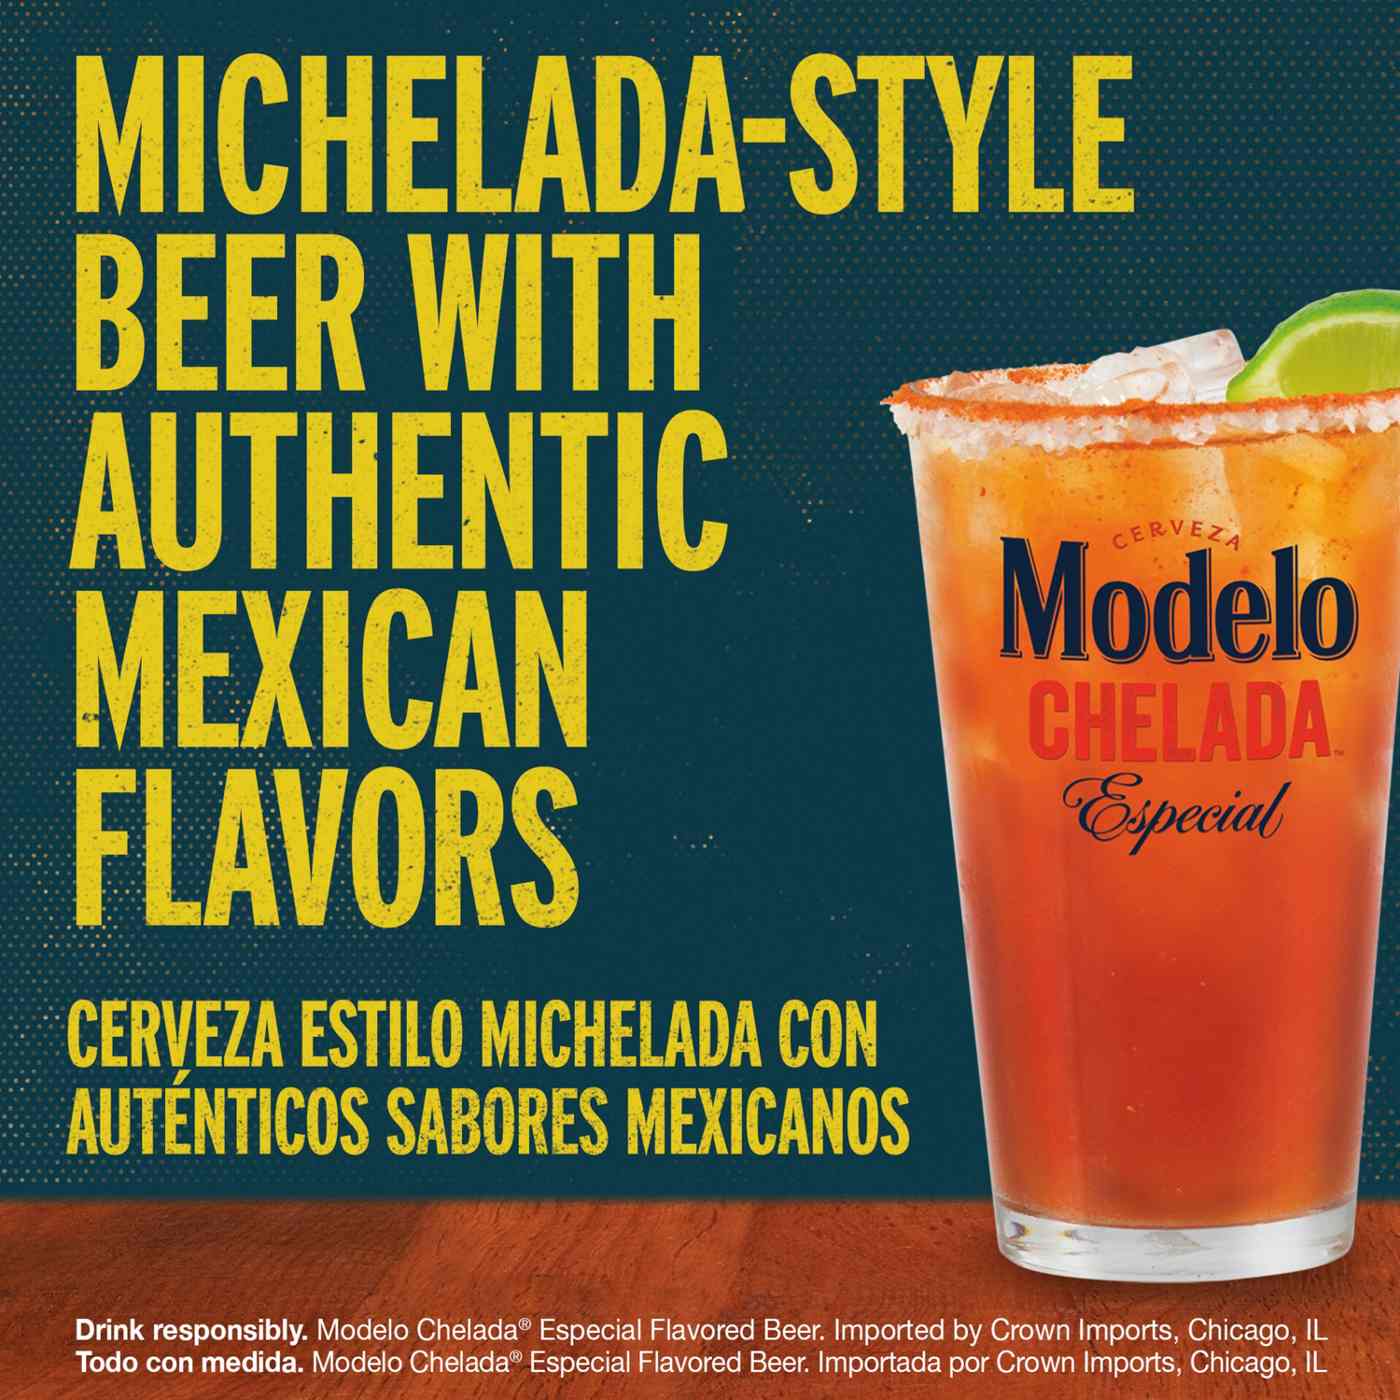 Modelo Chelada Mexican Import Flavored Beer 24 oz Cans, 3 pk; image 8 of 10